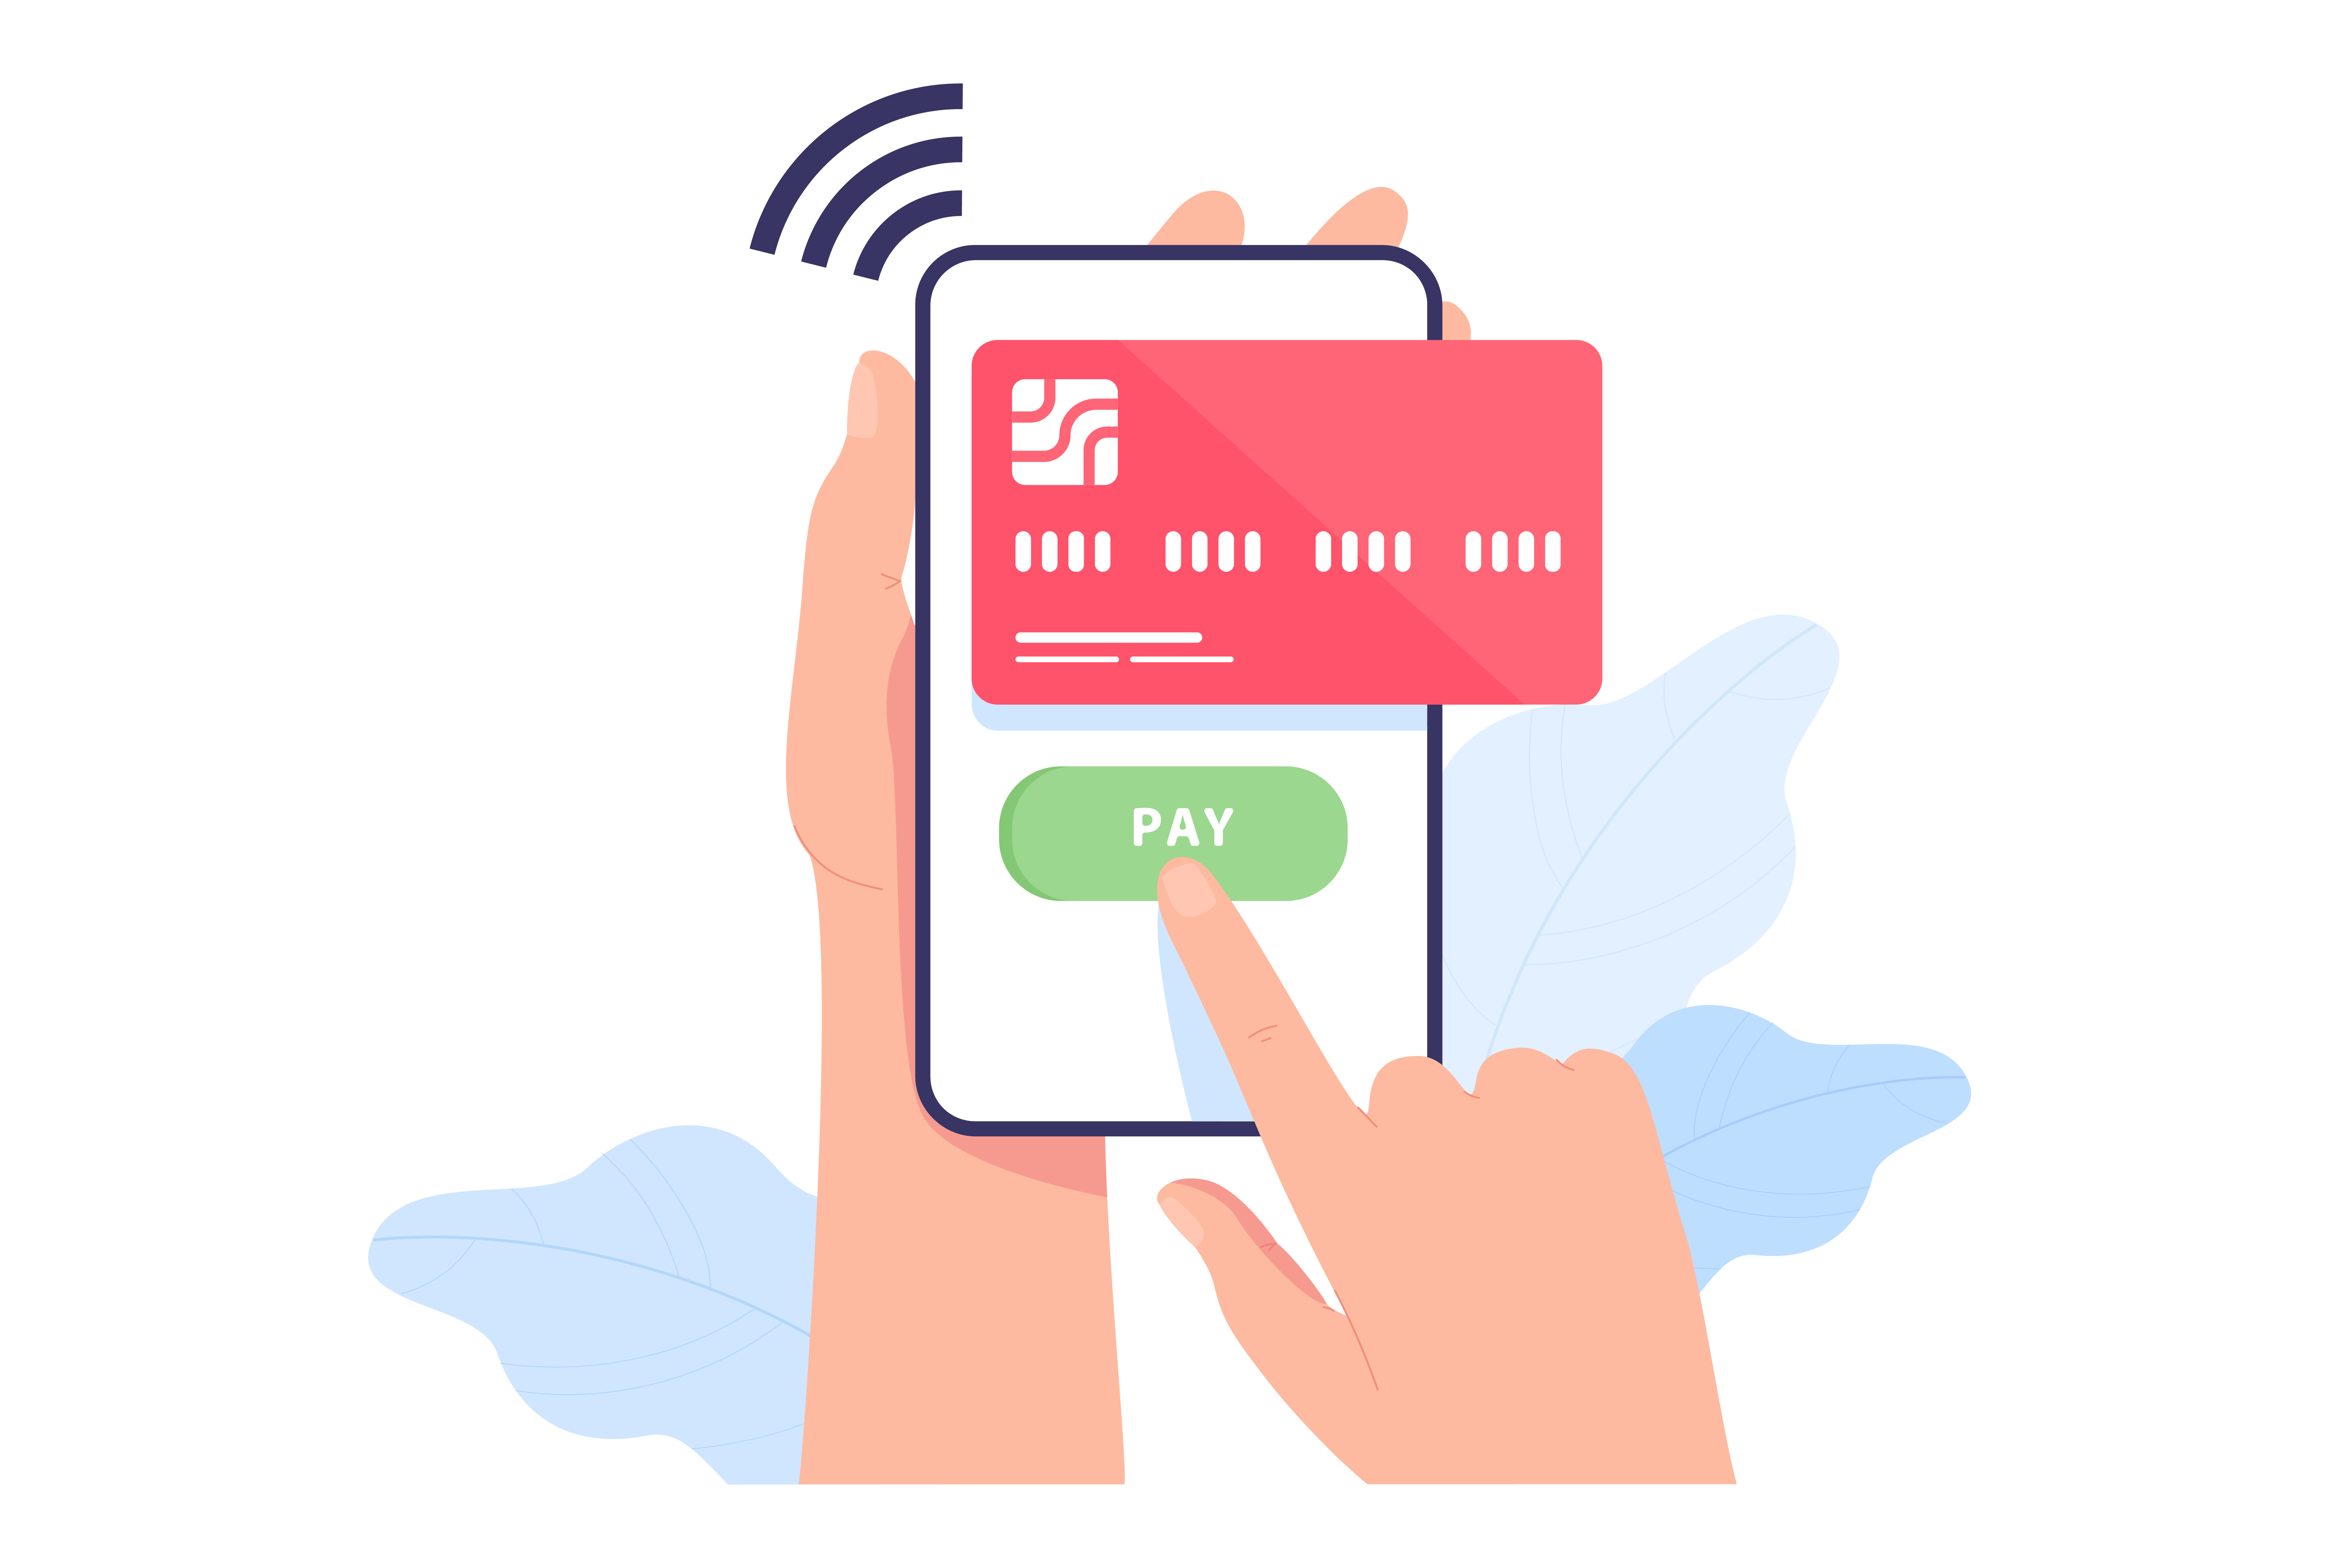 Hand holding phone with credit card on screen. Man making purchase, shopping, paying online using banking app flat vector illustration. Transaction, e-commerce concept